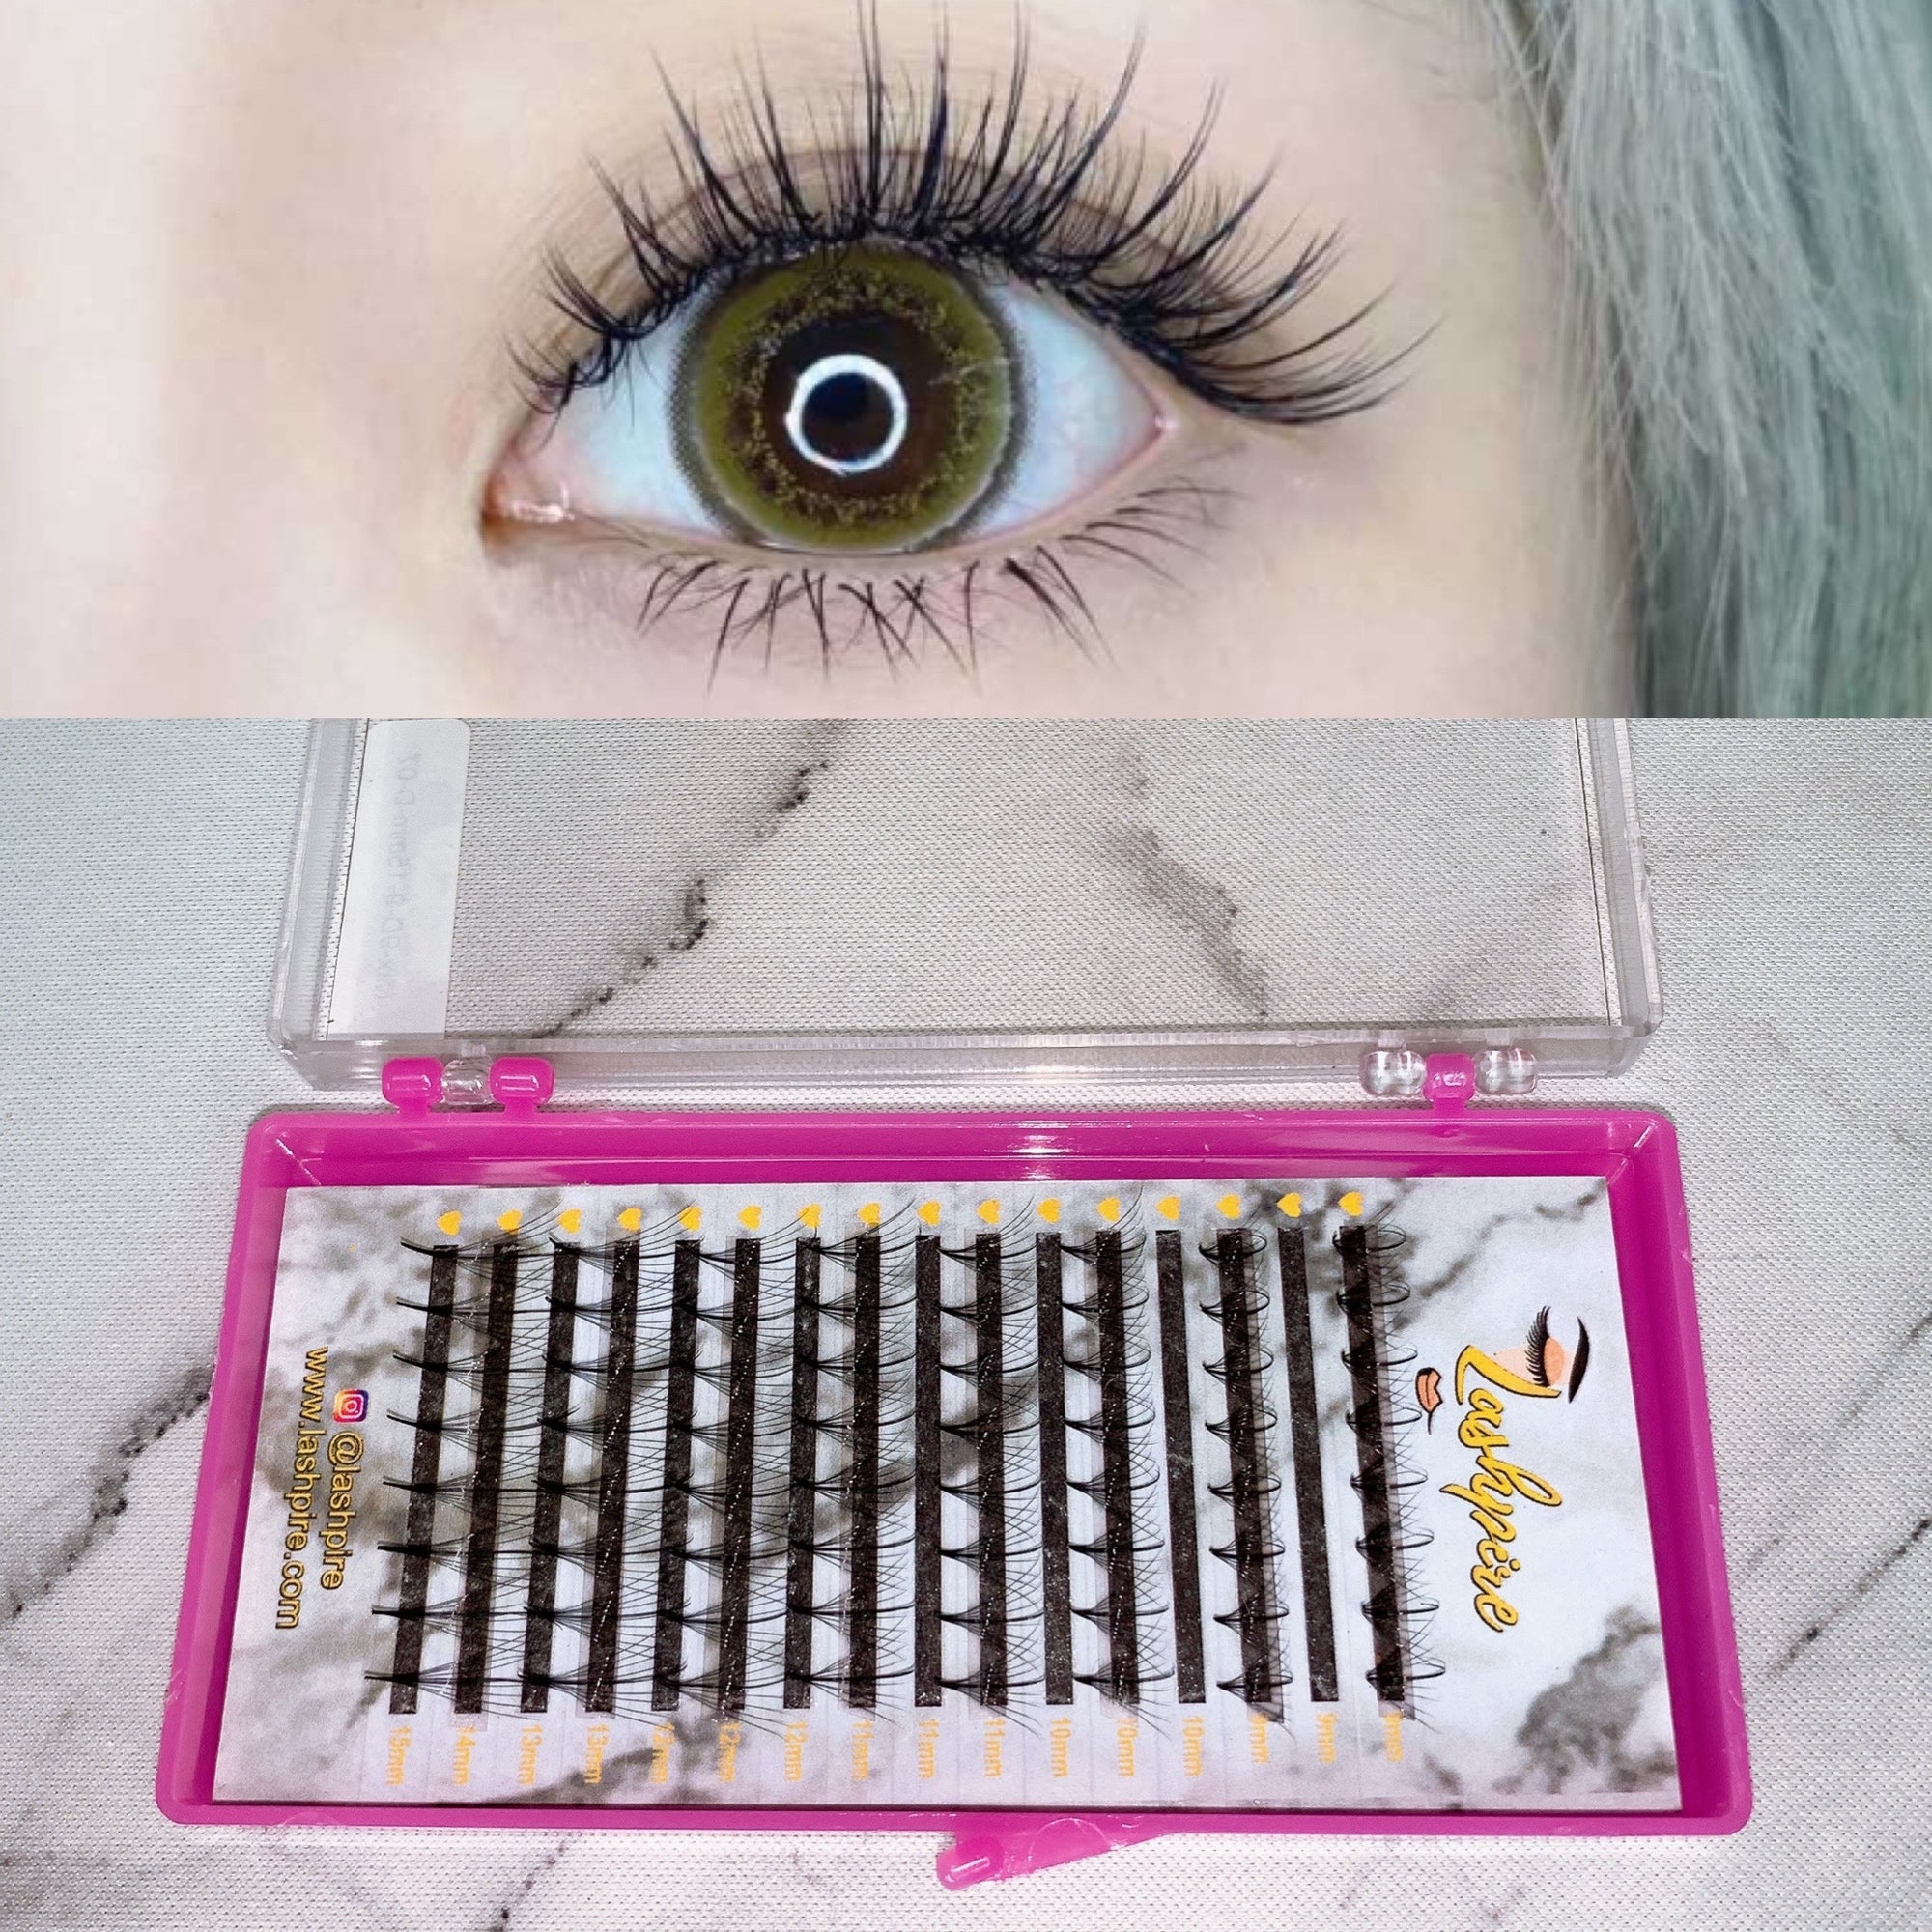 LASHPIRE® ECO COLLECTION 0.07mm MIX LENGTH Pro-made Ready made Katun Wispy 9D Premade Spikes Volume Fans Lash Tray